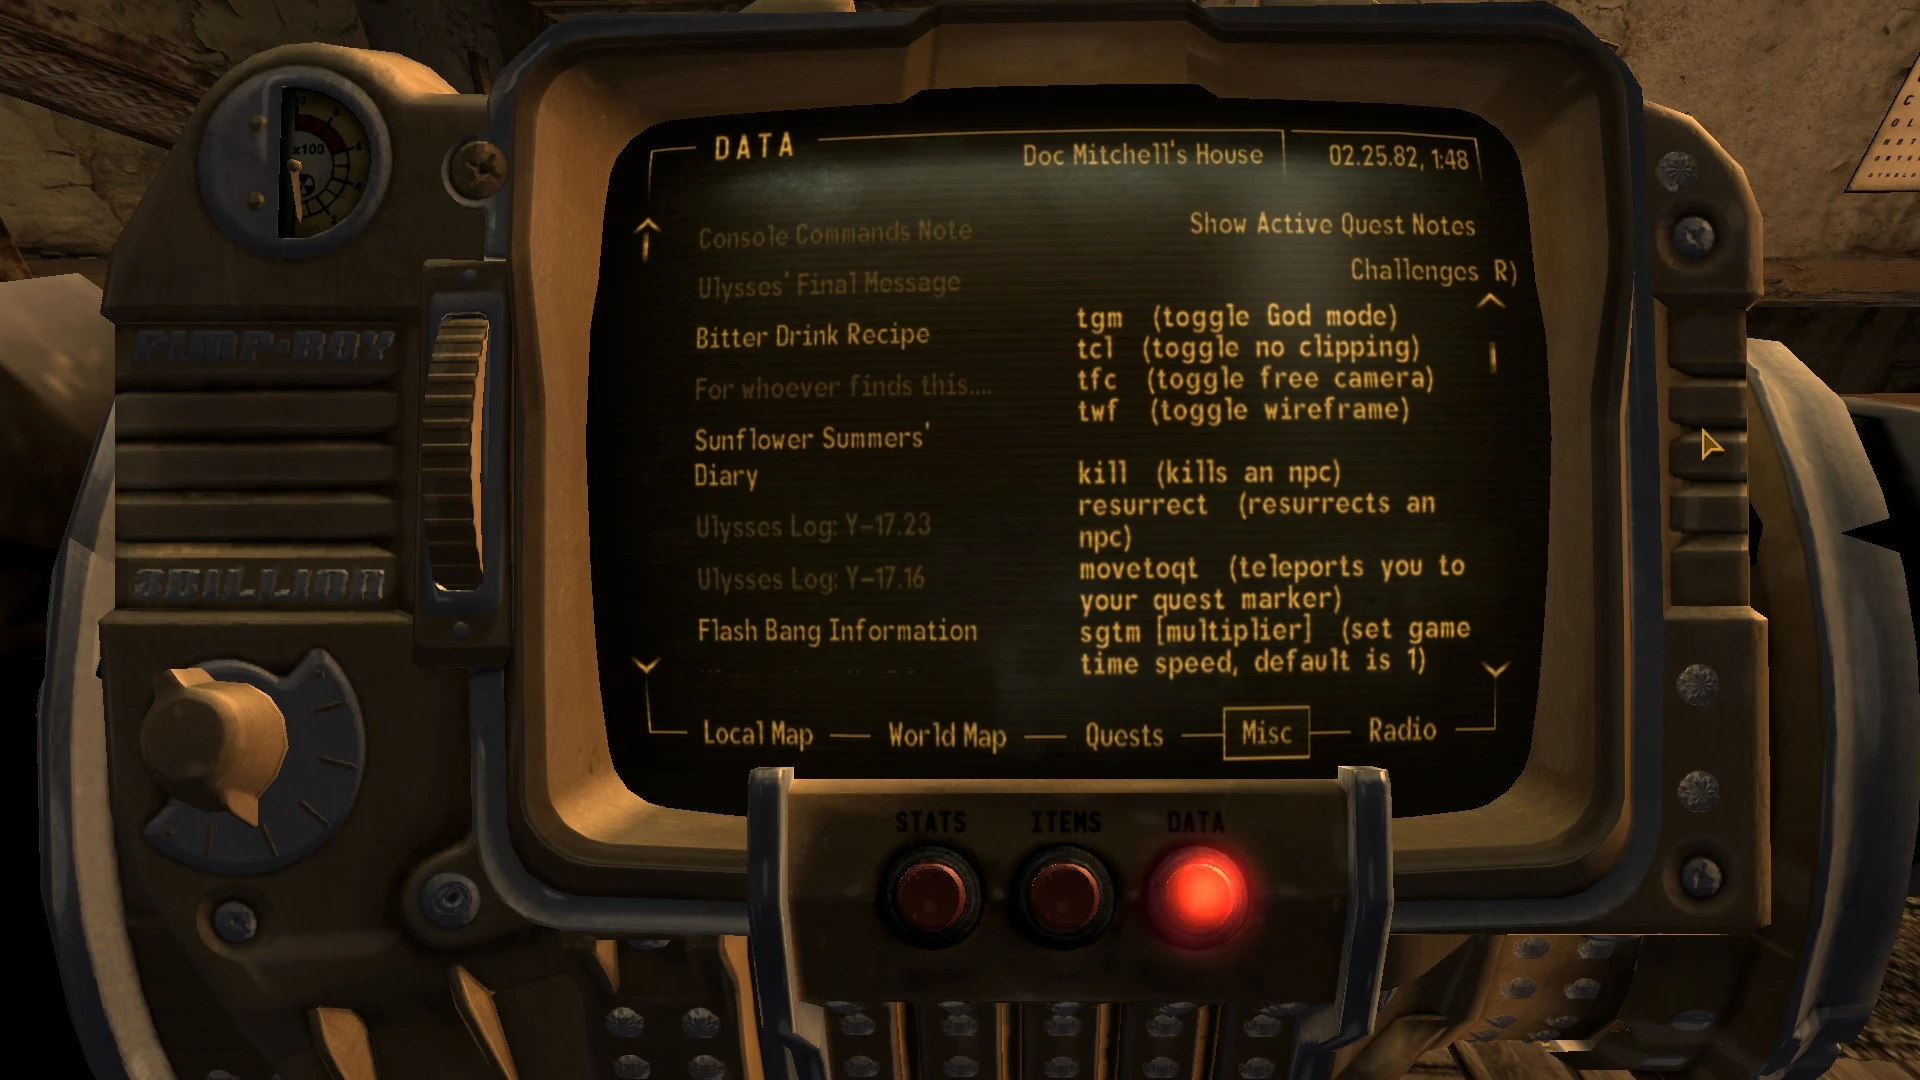 fallout 4 reset quest command